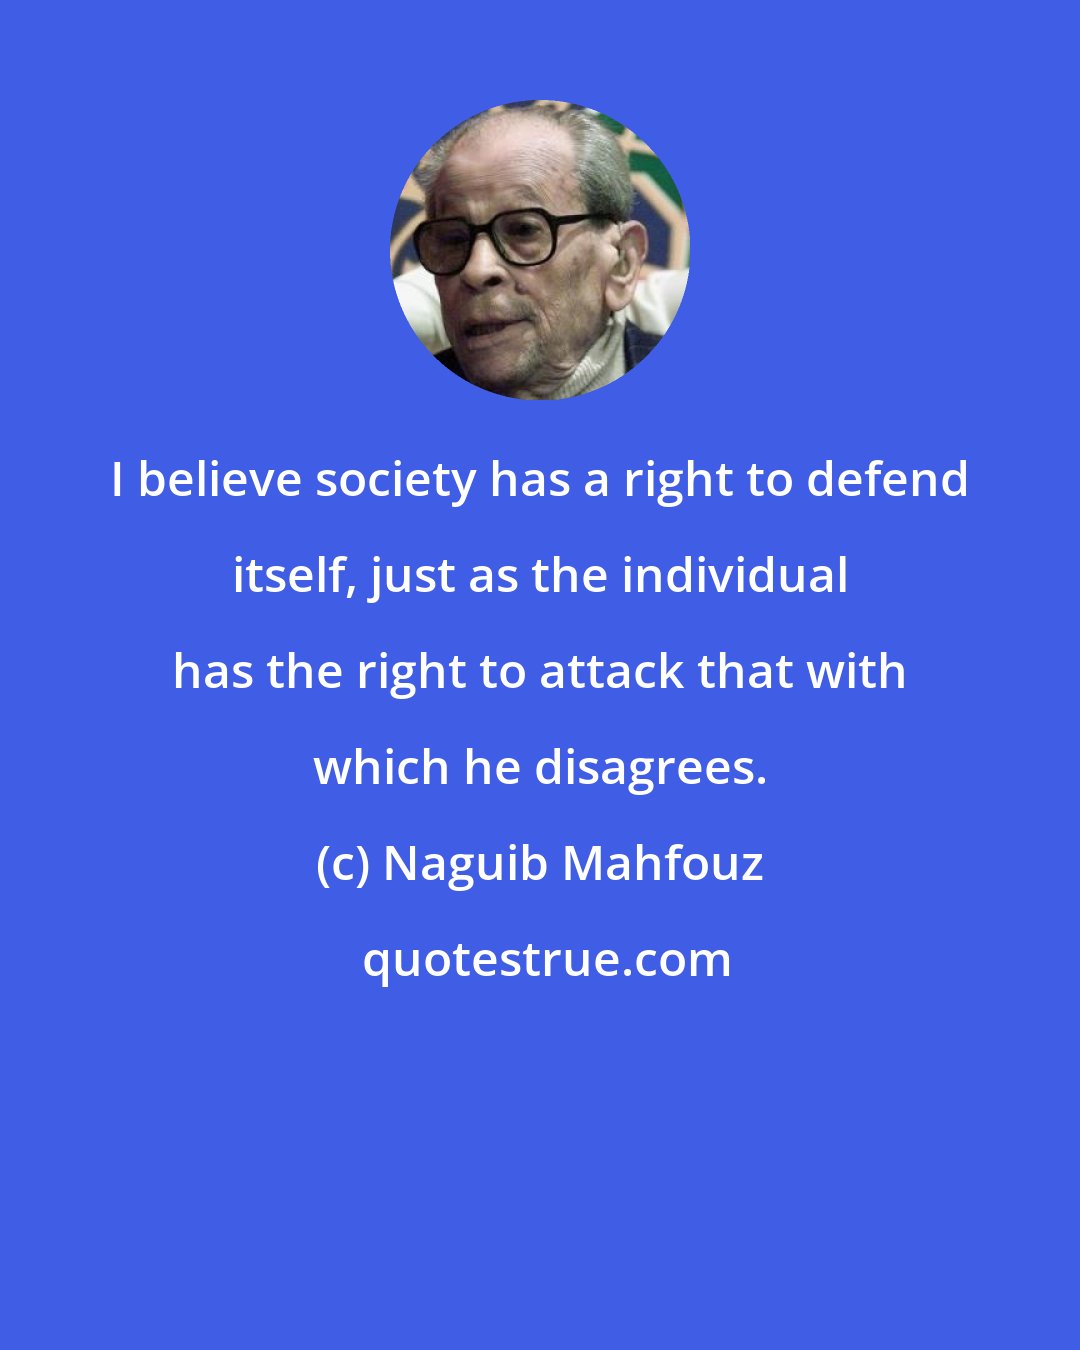 Naguib Mahfouz: I believe society has a right to defend itself, just as the individual has the right to attack that with which he disagrees.